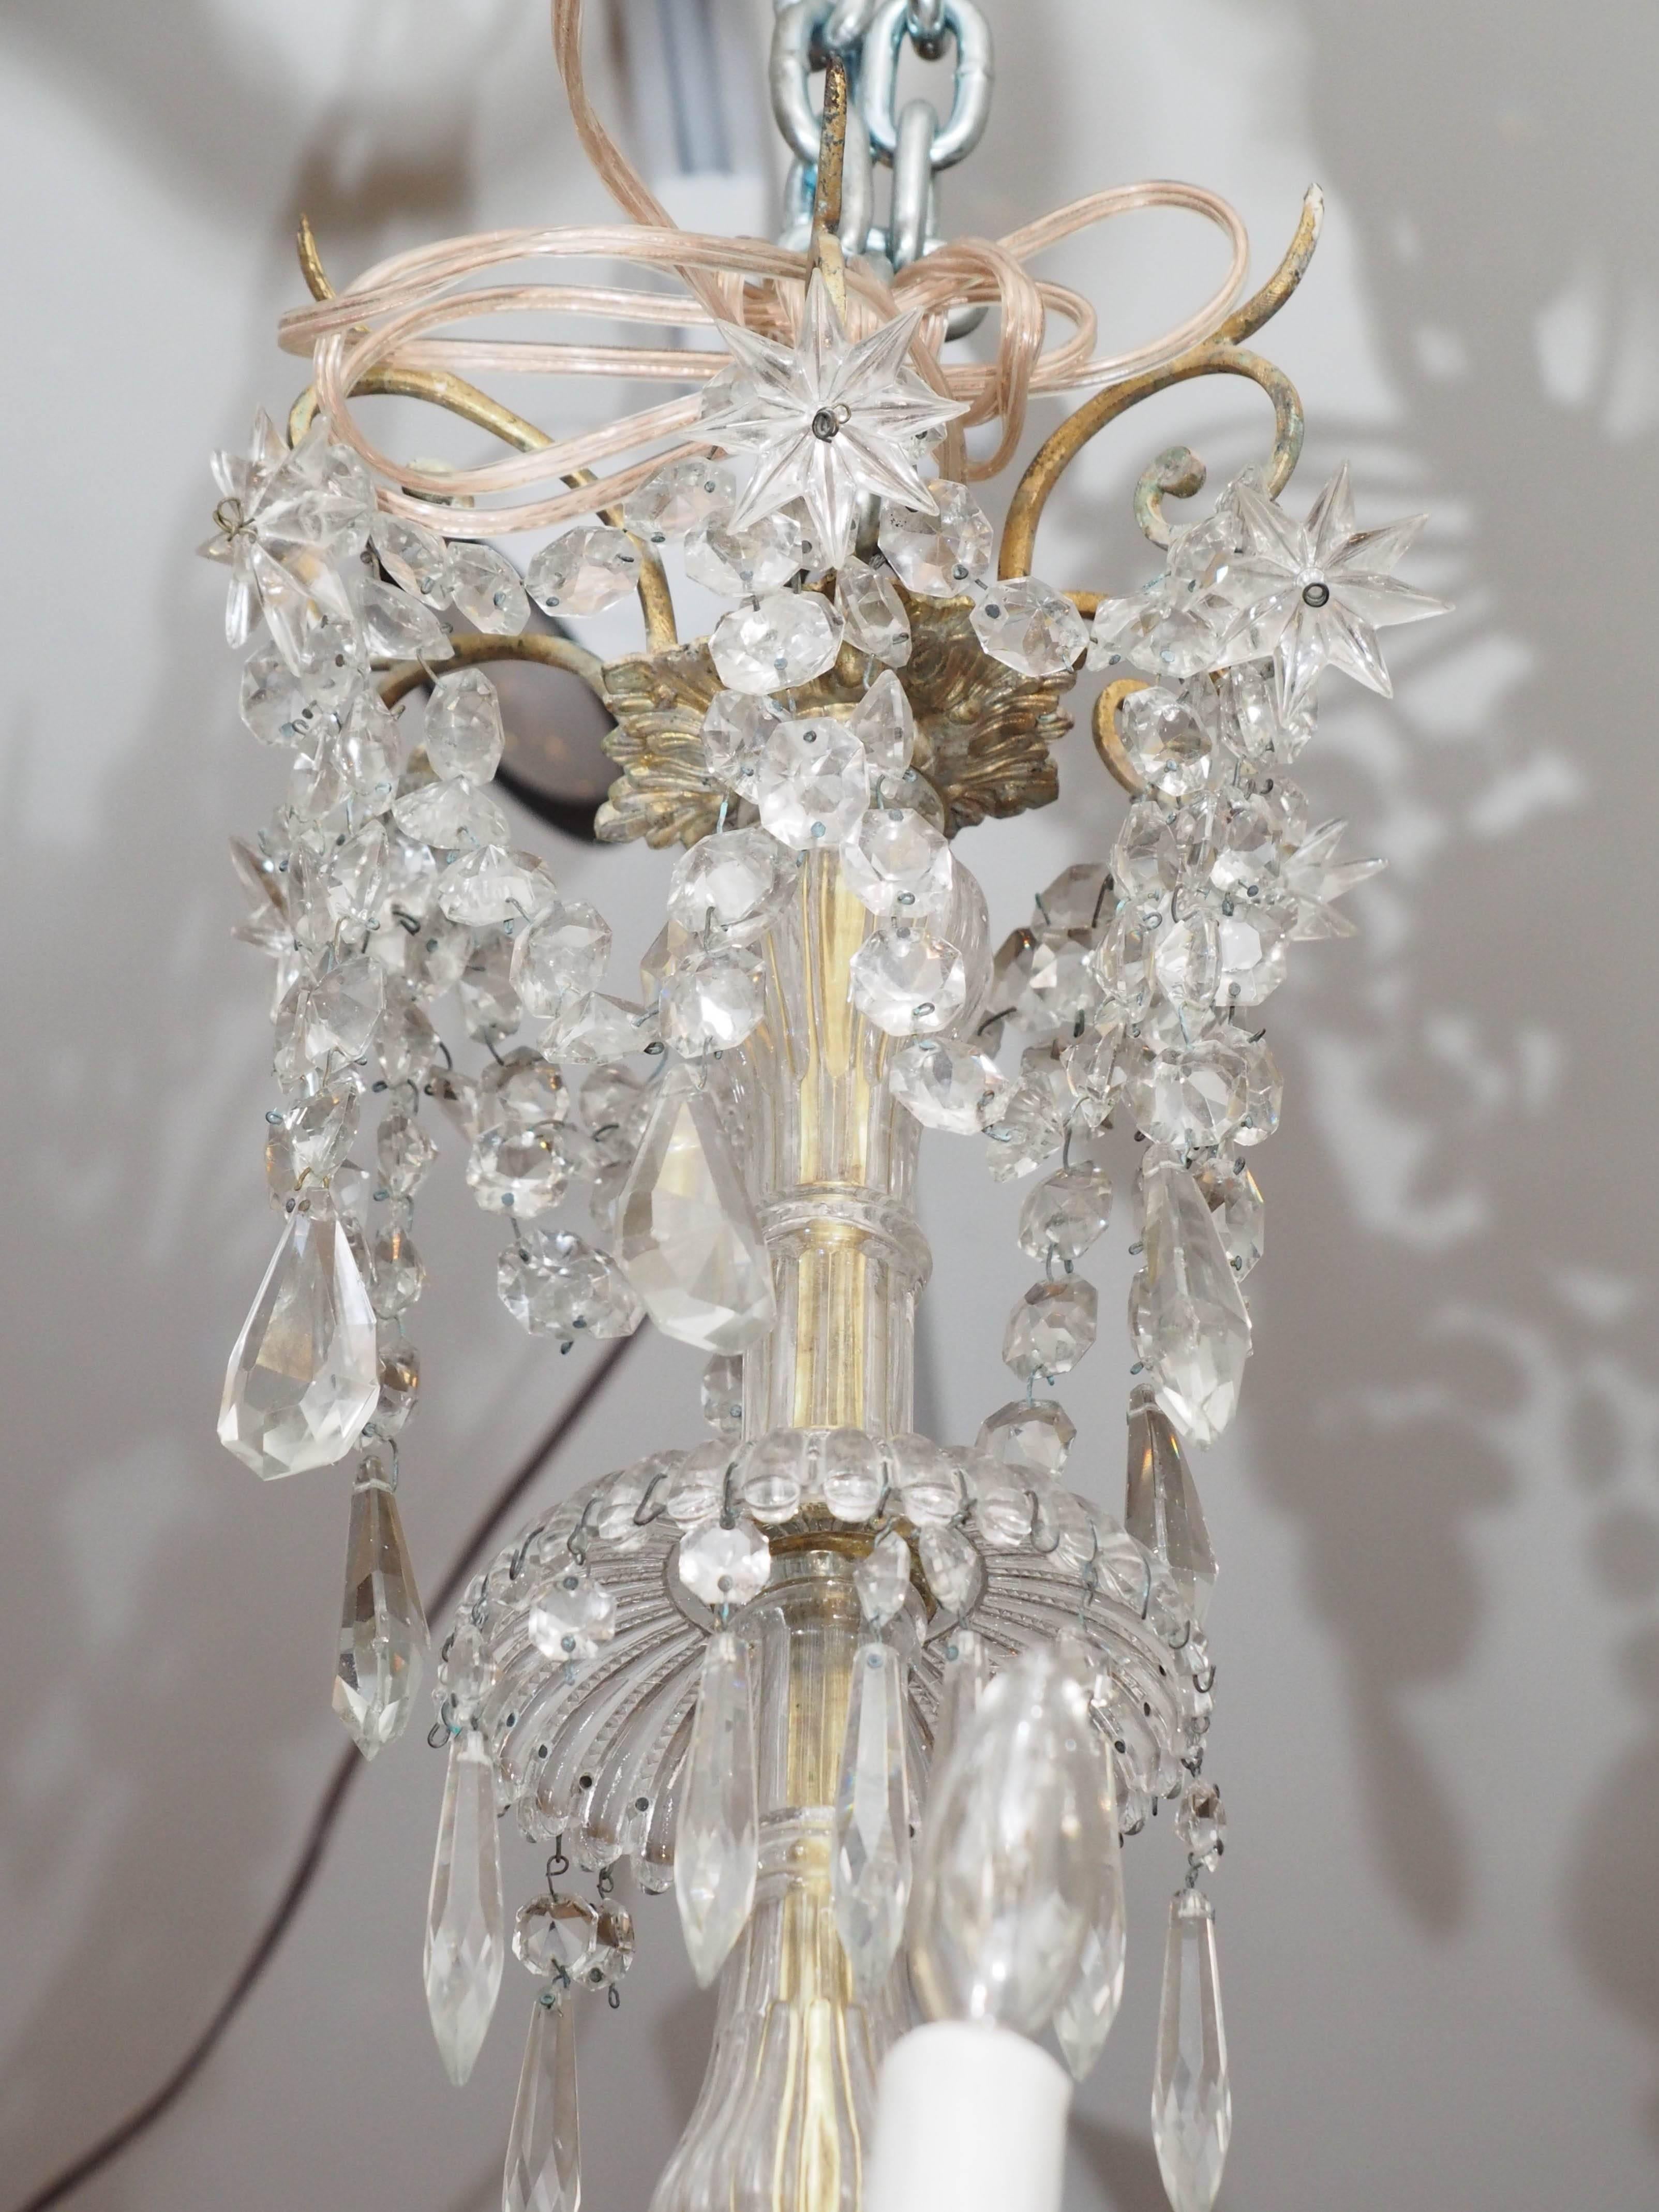 French Napoleon III gilt bronze and Baccarat crystal chandelier with 18 lights. This chandelier has been re wired but with no guarantee after transport, it should be checked over. All chandeliers come with canopy and chain and silk cord cover and